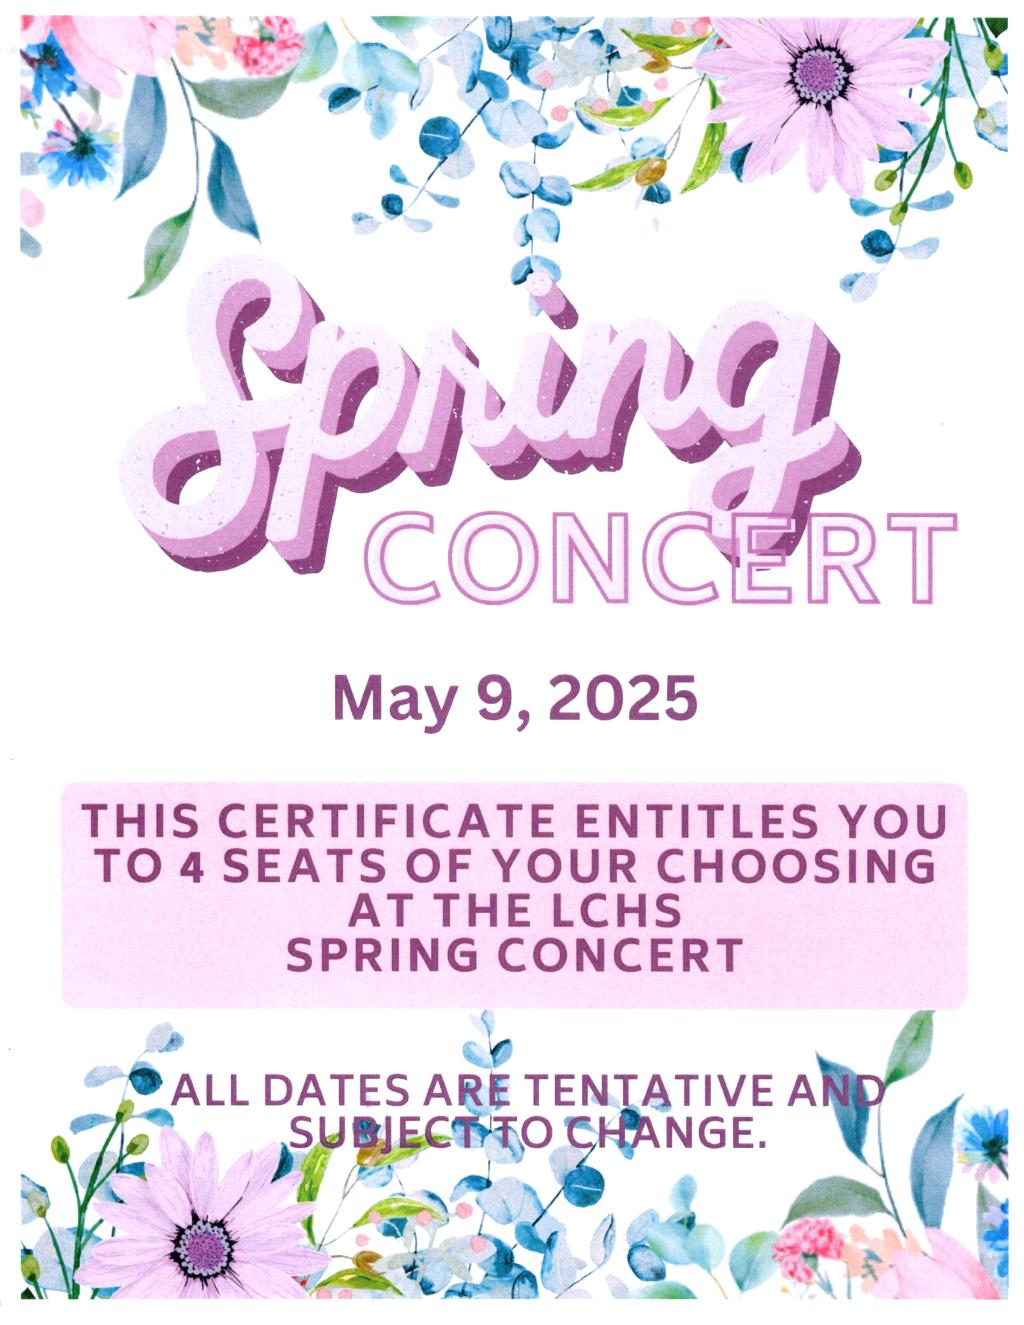 4 seats of your choosing to 2025 SpringMusicConcert